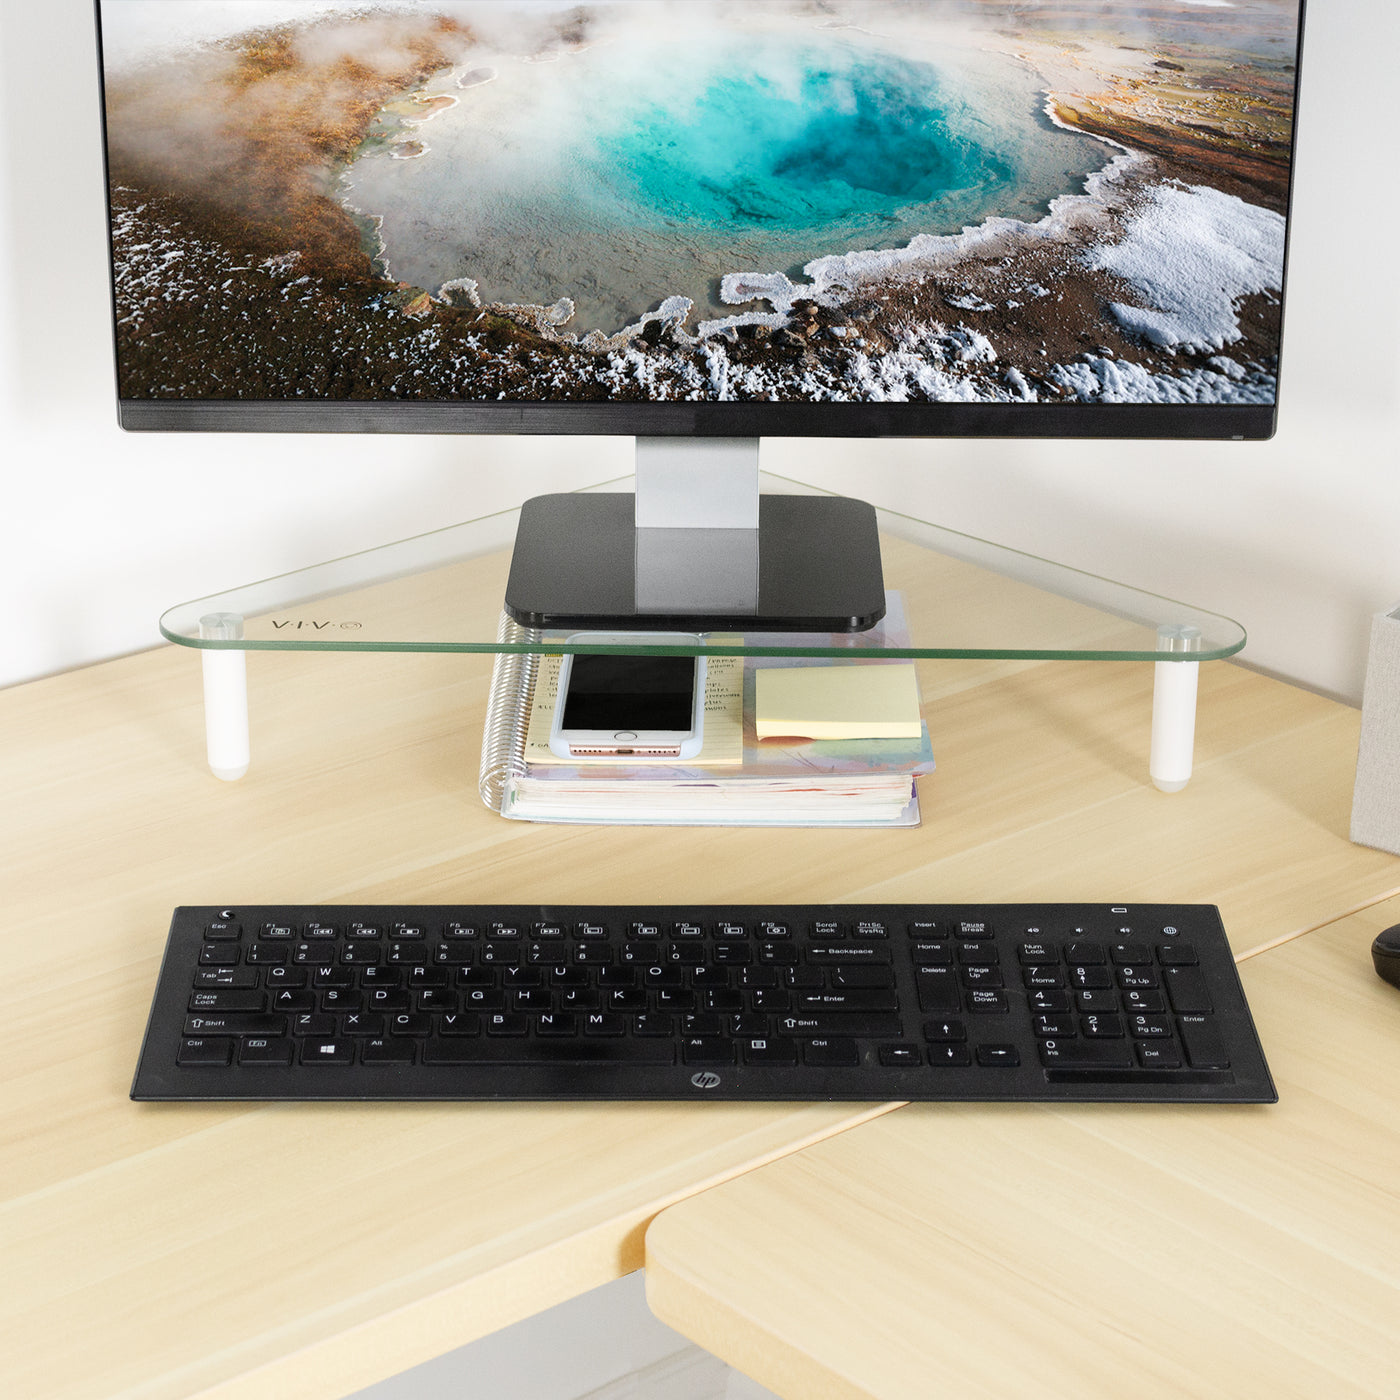 Triangle glass tabletop monitor riser for comfortable viewing.